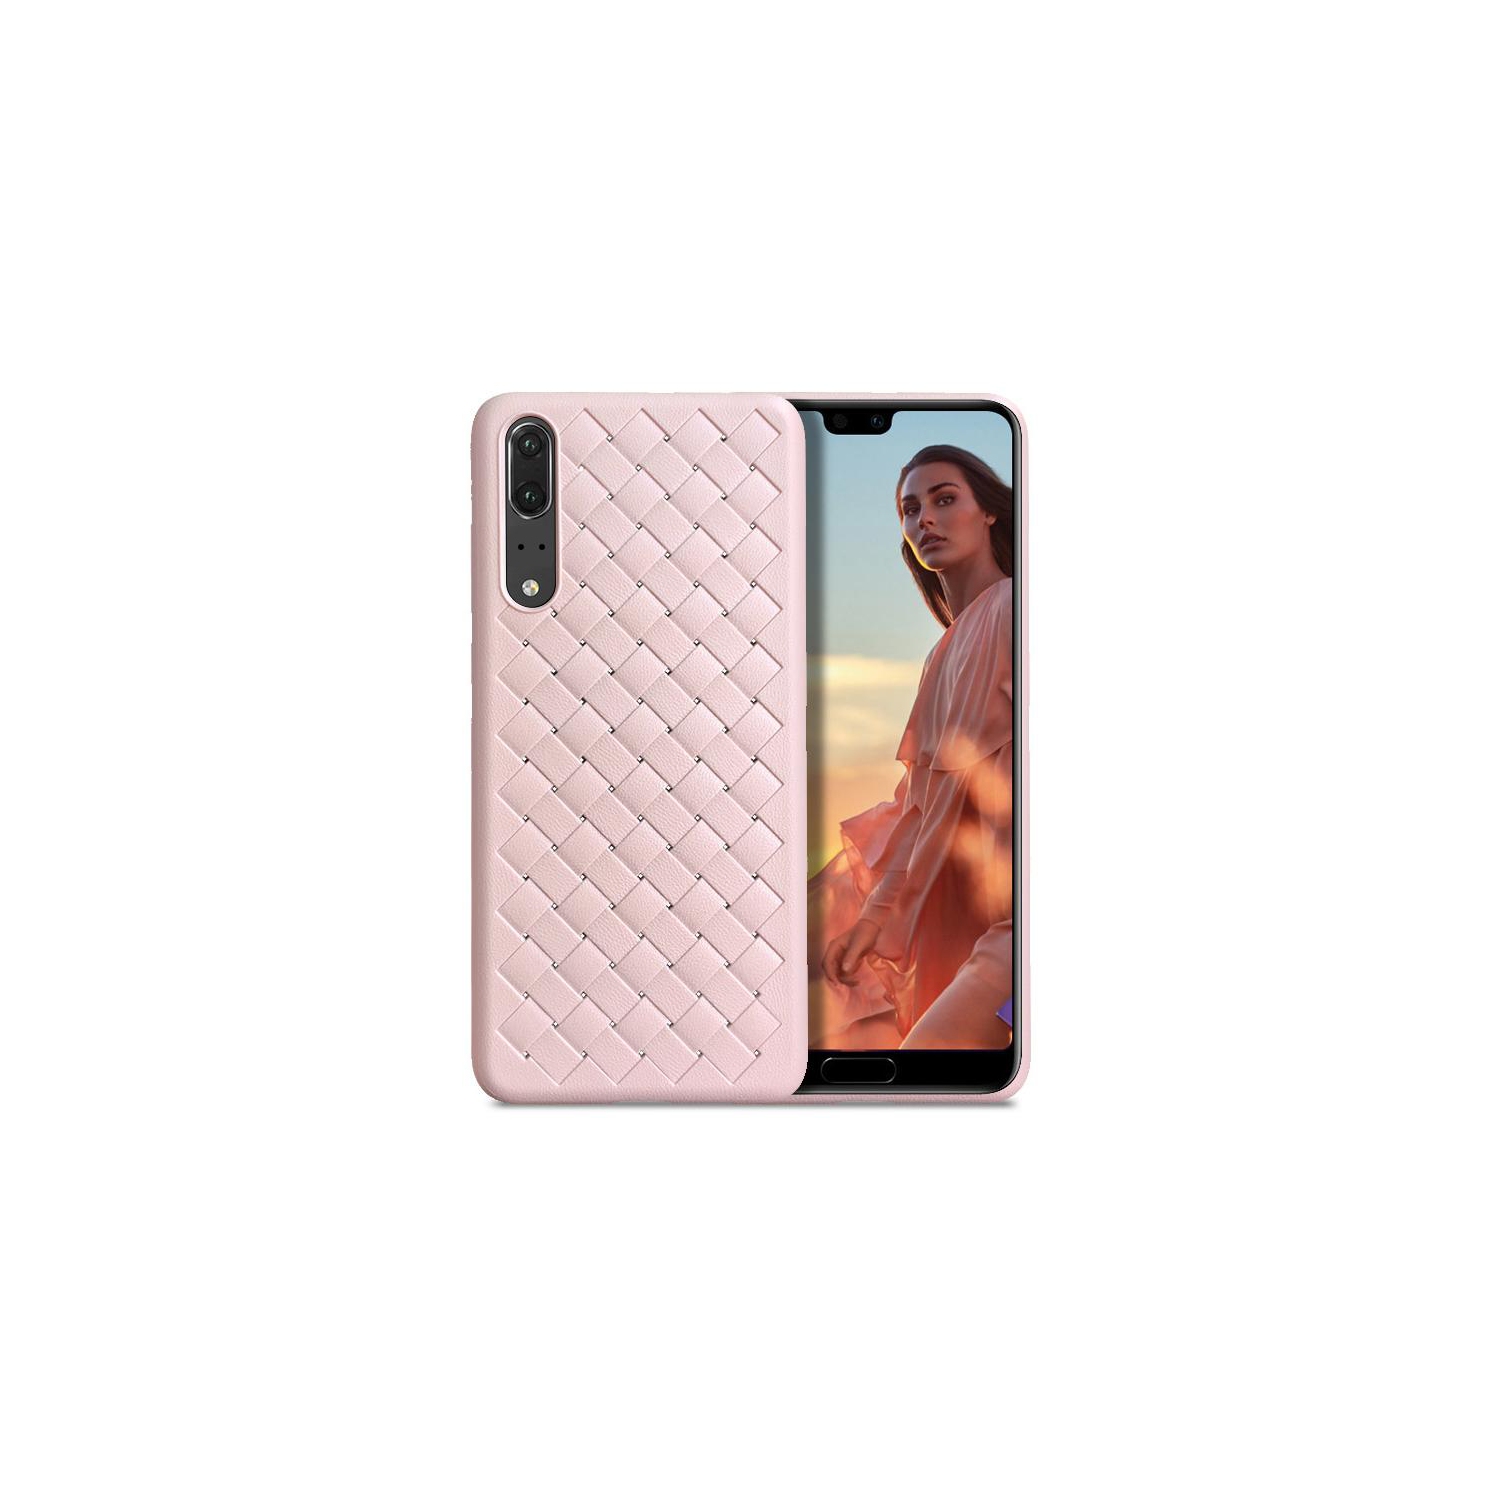 PANDACO Pink Leather Cross-Weave Case for Huawei P20